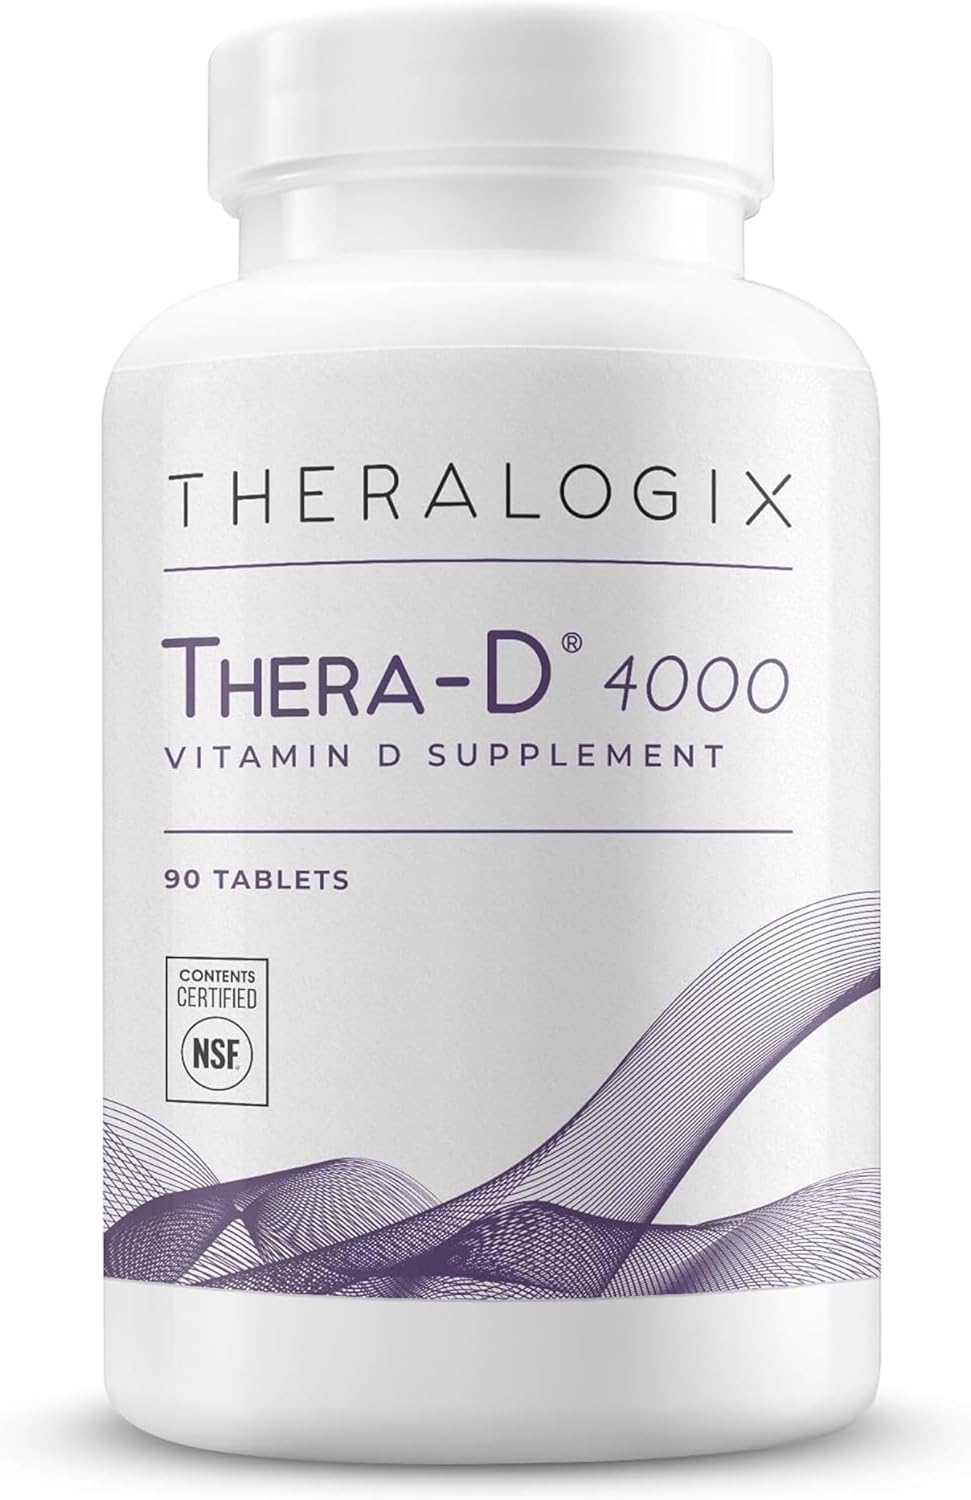 Theralogix Thera-D 4000 Vitamin D Supplement - 4,000 IU (100 mcg) Vitamin D3 Tablets - 90-Day Supply - Immune Support Supplement for Women & Men - Aids Bone & Heart Health - NSF Certified - 90 Tablets